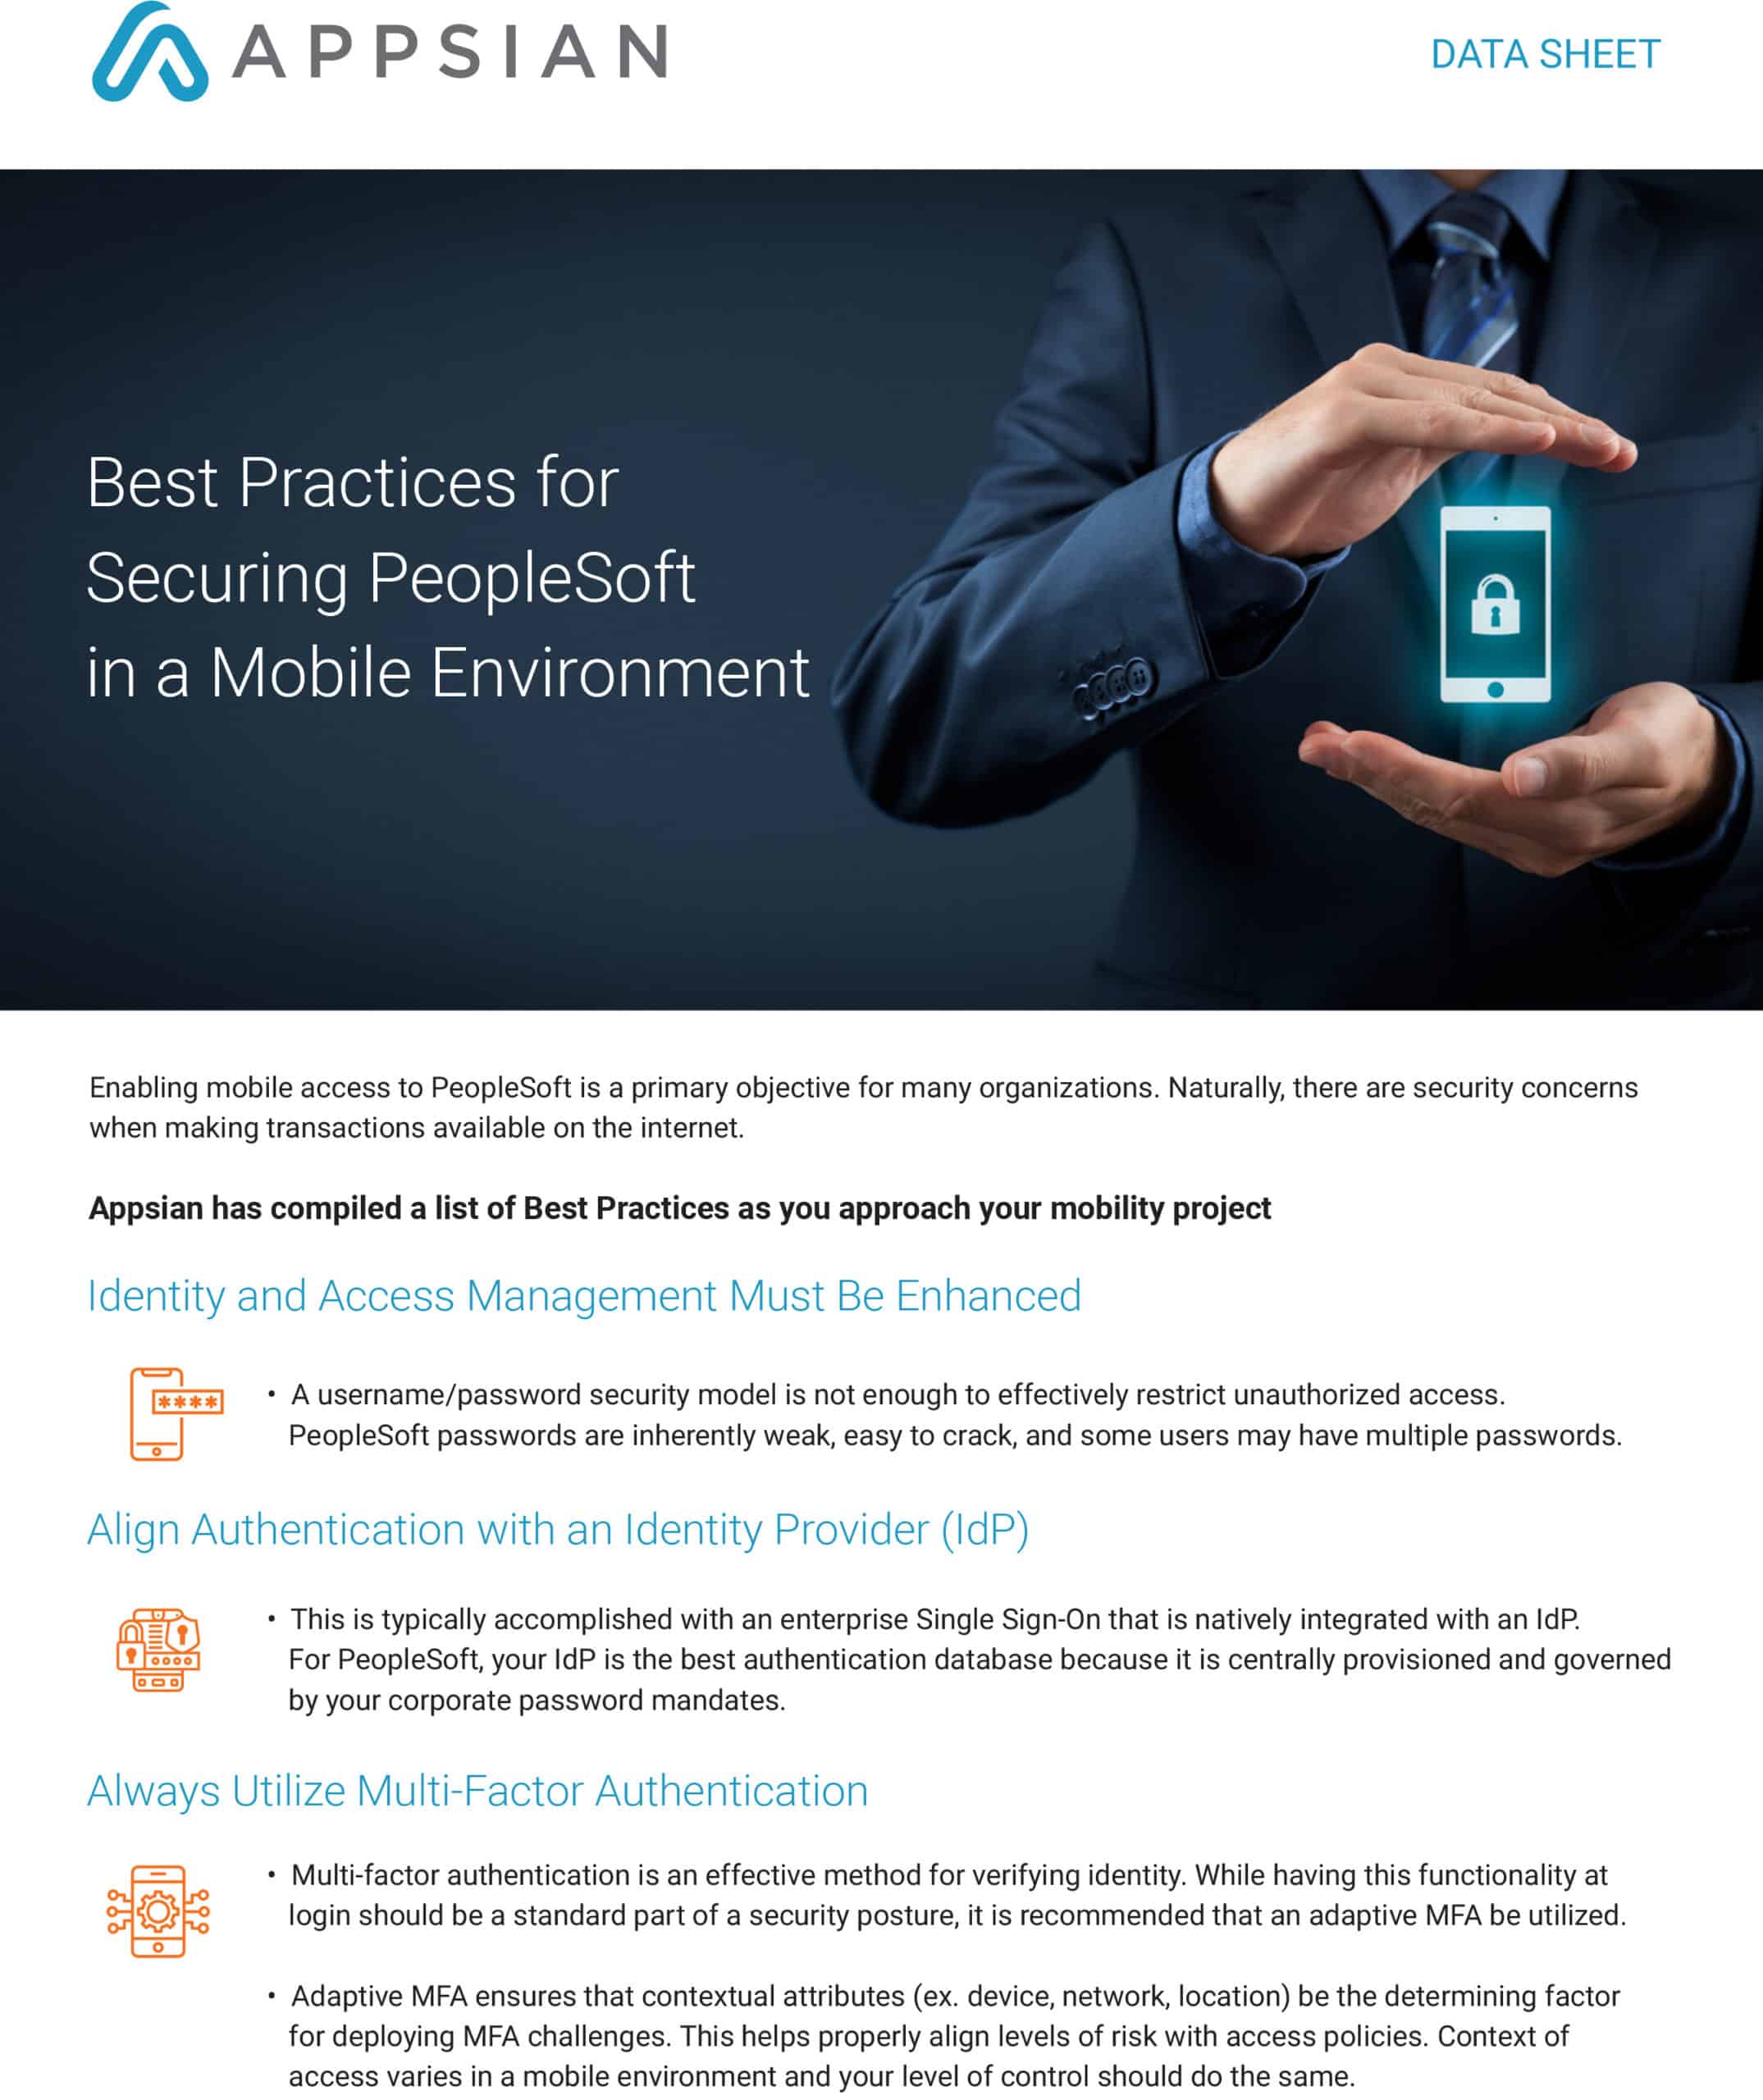 Best Practices for Securing PeopleSoft in a Mobile Environment